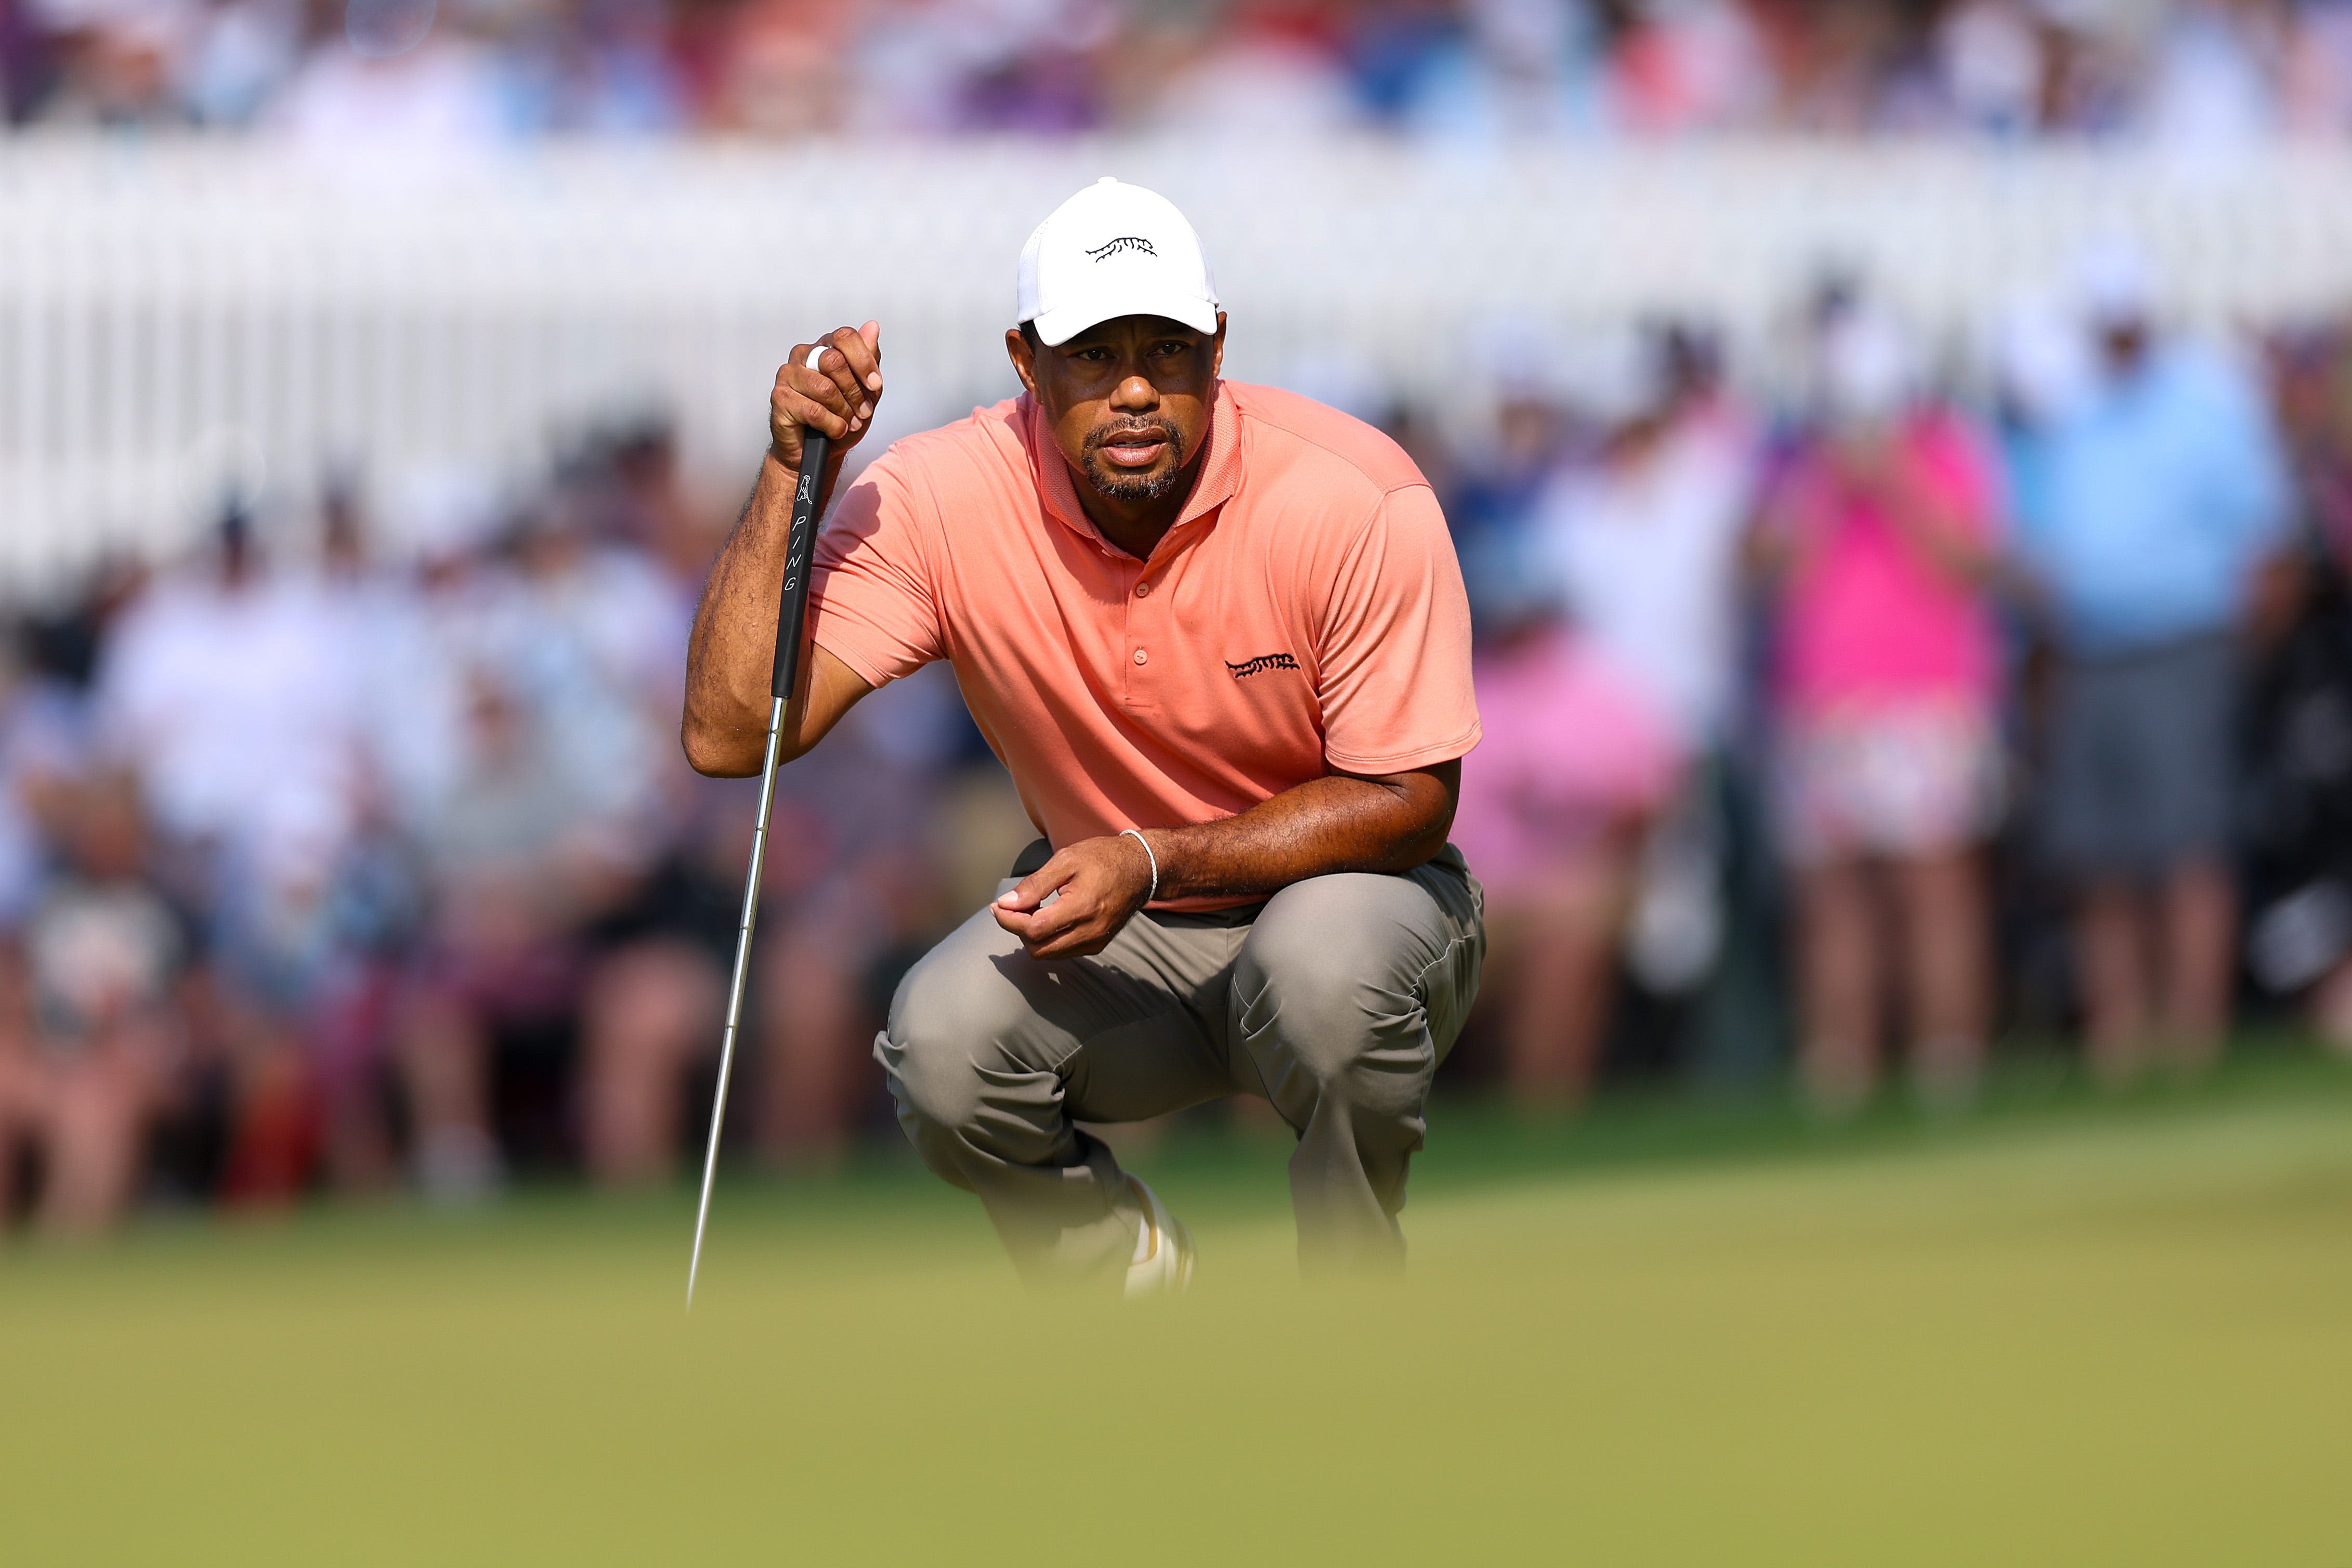 Tiger Woods tracker: Round 2 score as golf icon misses cut at PGA Championship